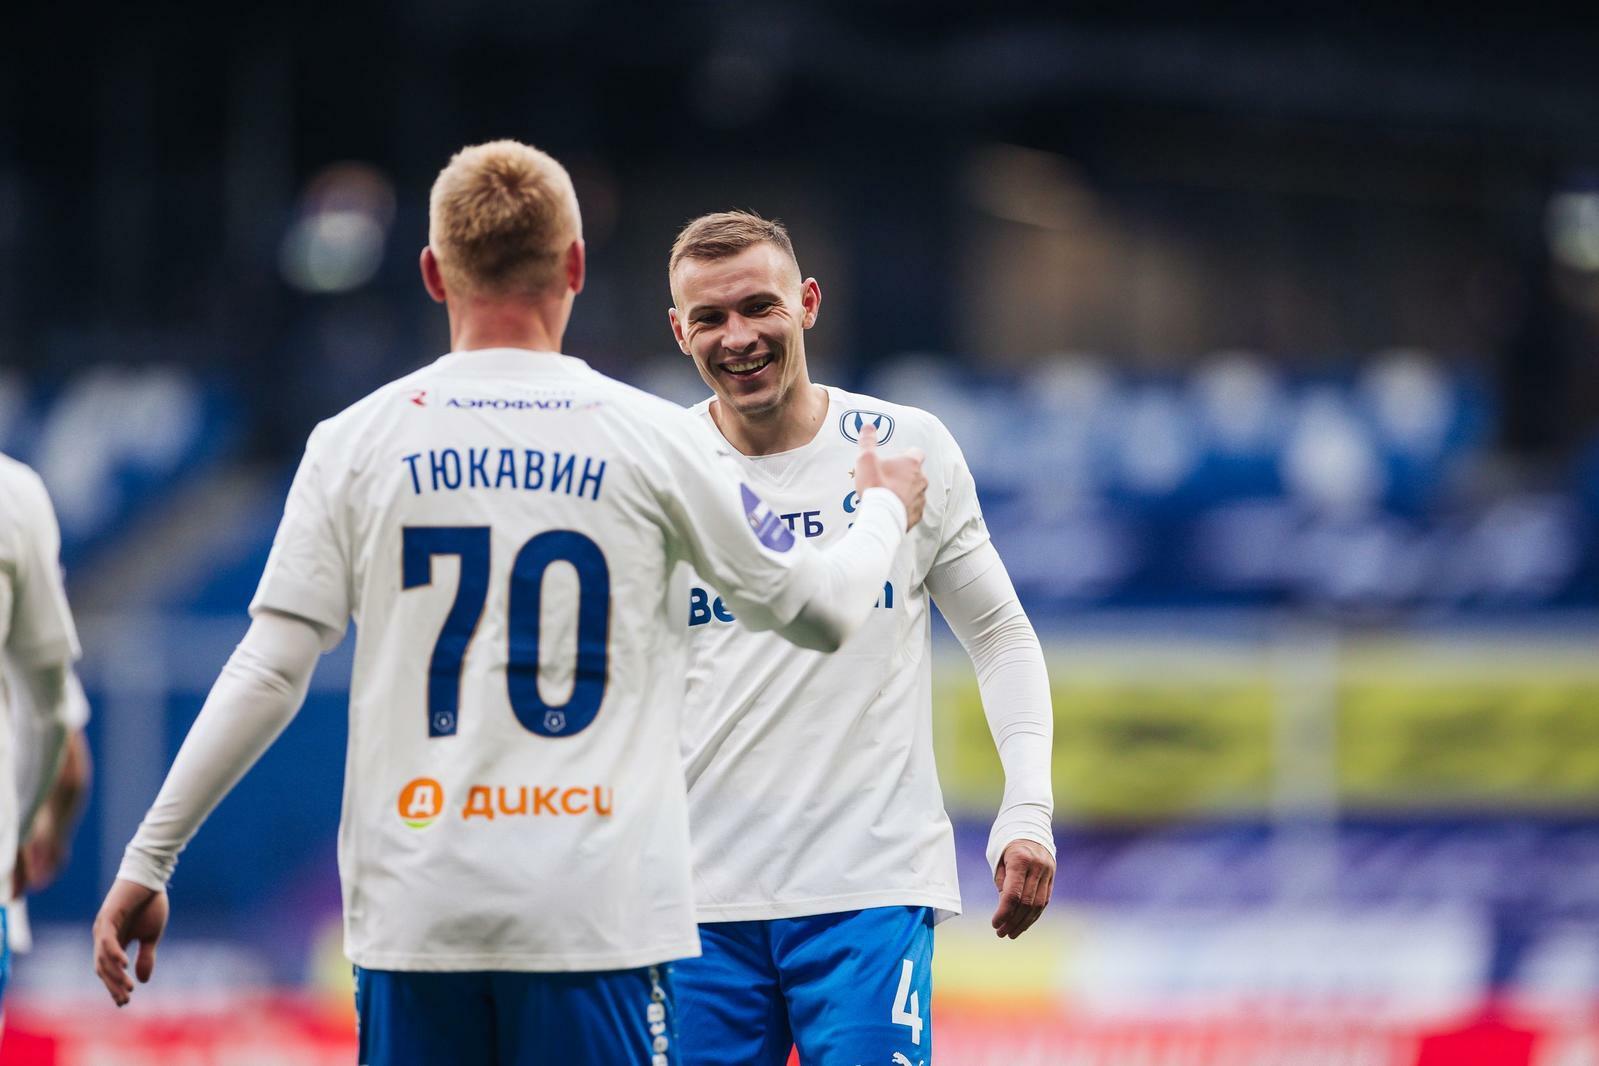 FC Dynamo Moscow News | Sergey Parshivlyuk: "We have team faith in each other and a positive result." Official Dynamo Club Website.